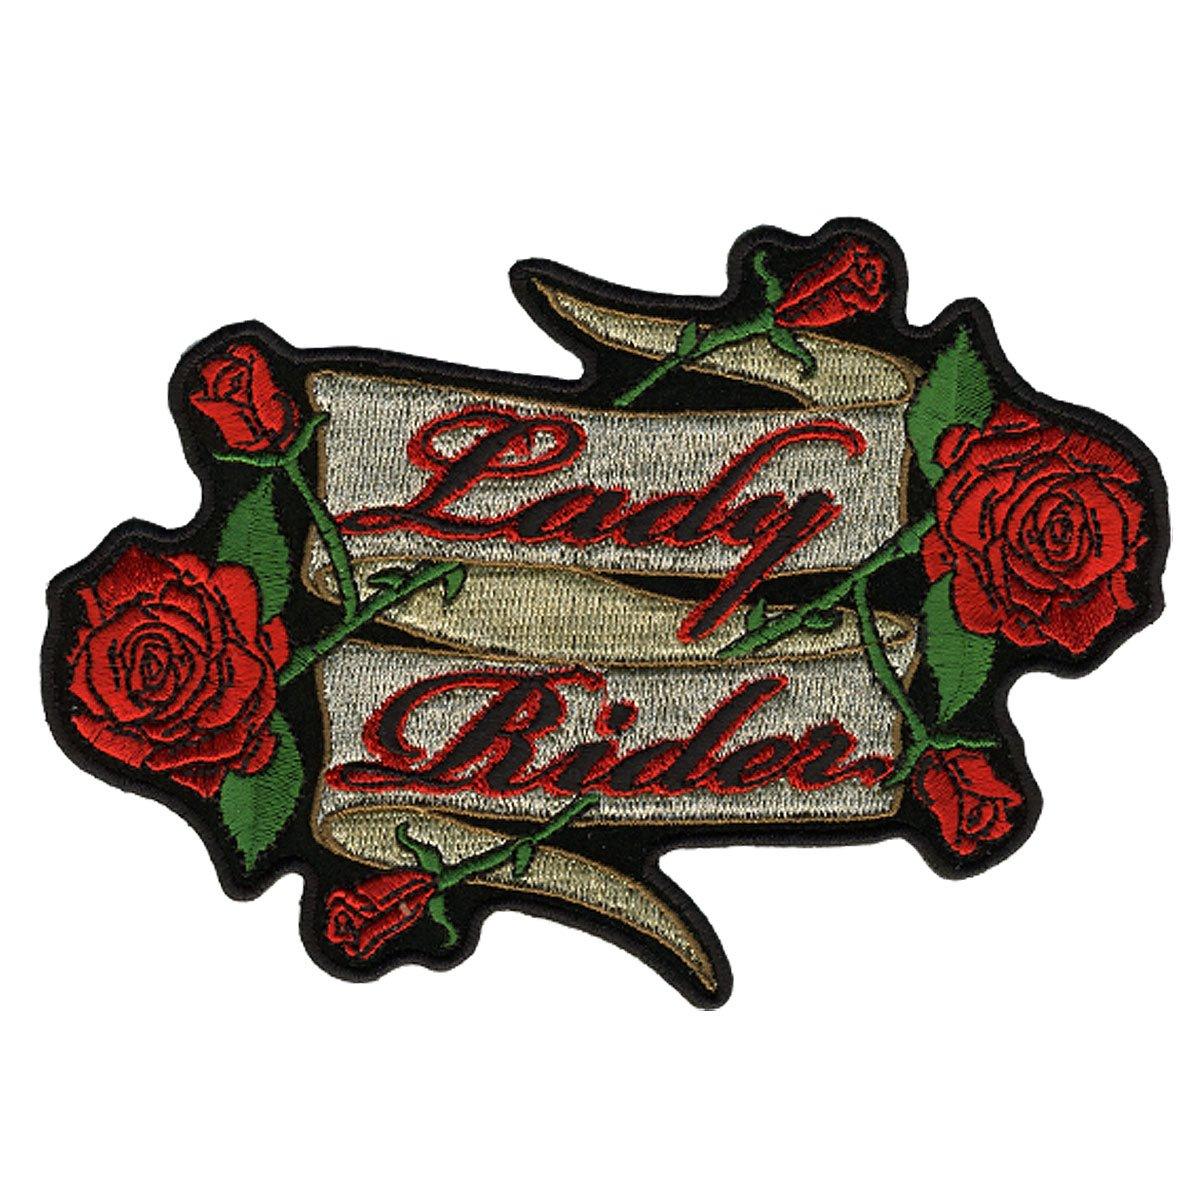 Hot Leathers Lady Rider Roses 5" X 4" Patch - American Legend Rider